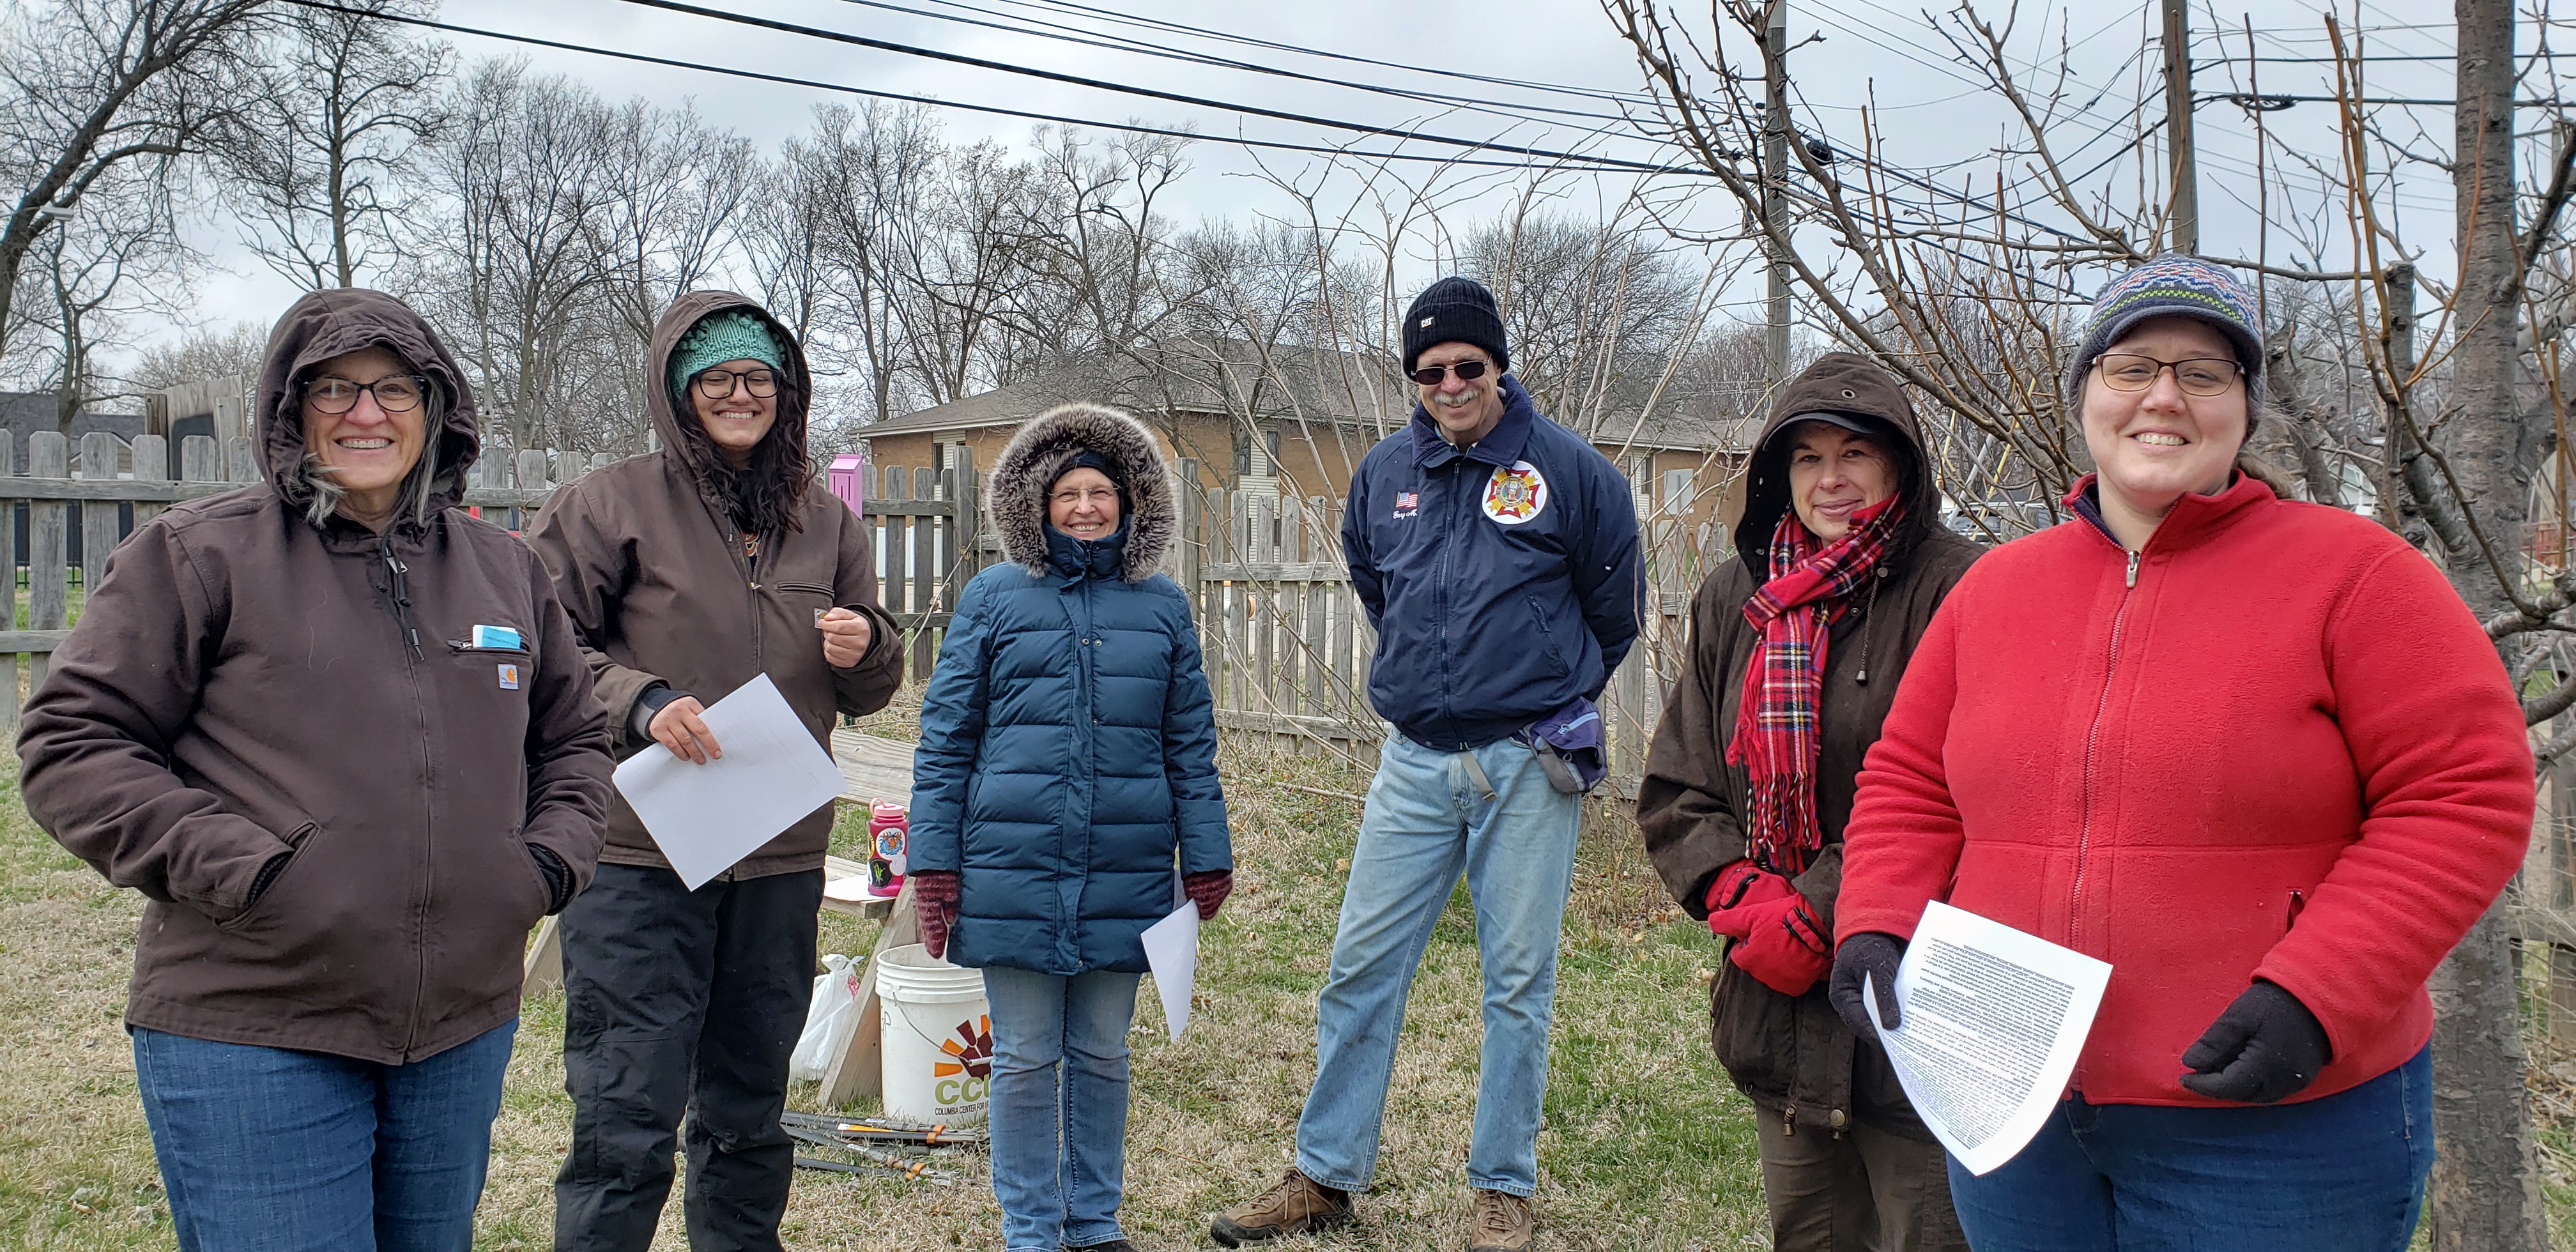 participants in an elderberry pruning workshop pose for a photo in the Kilgore's garden, bundled up against cold weather